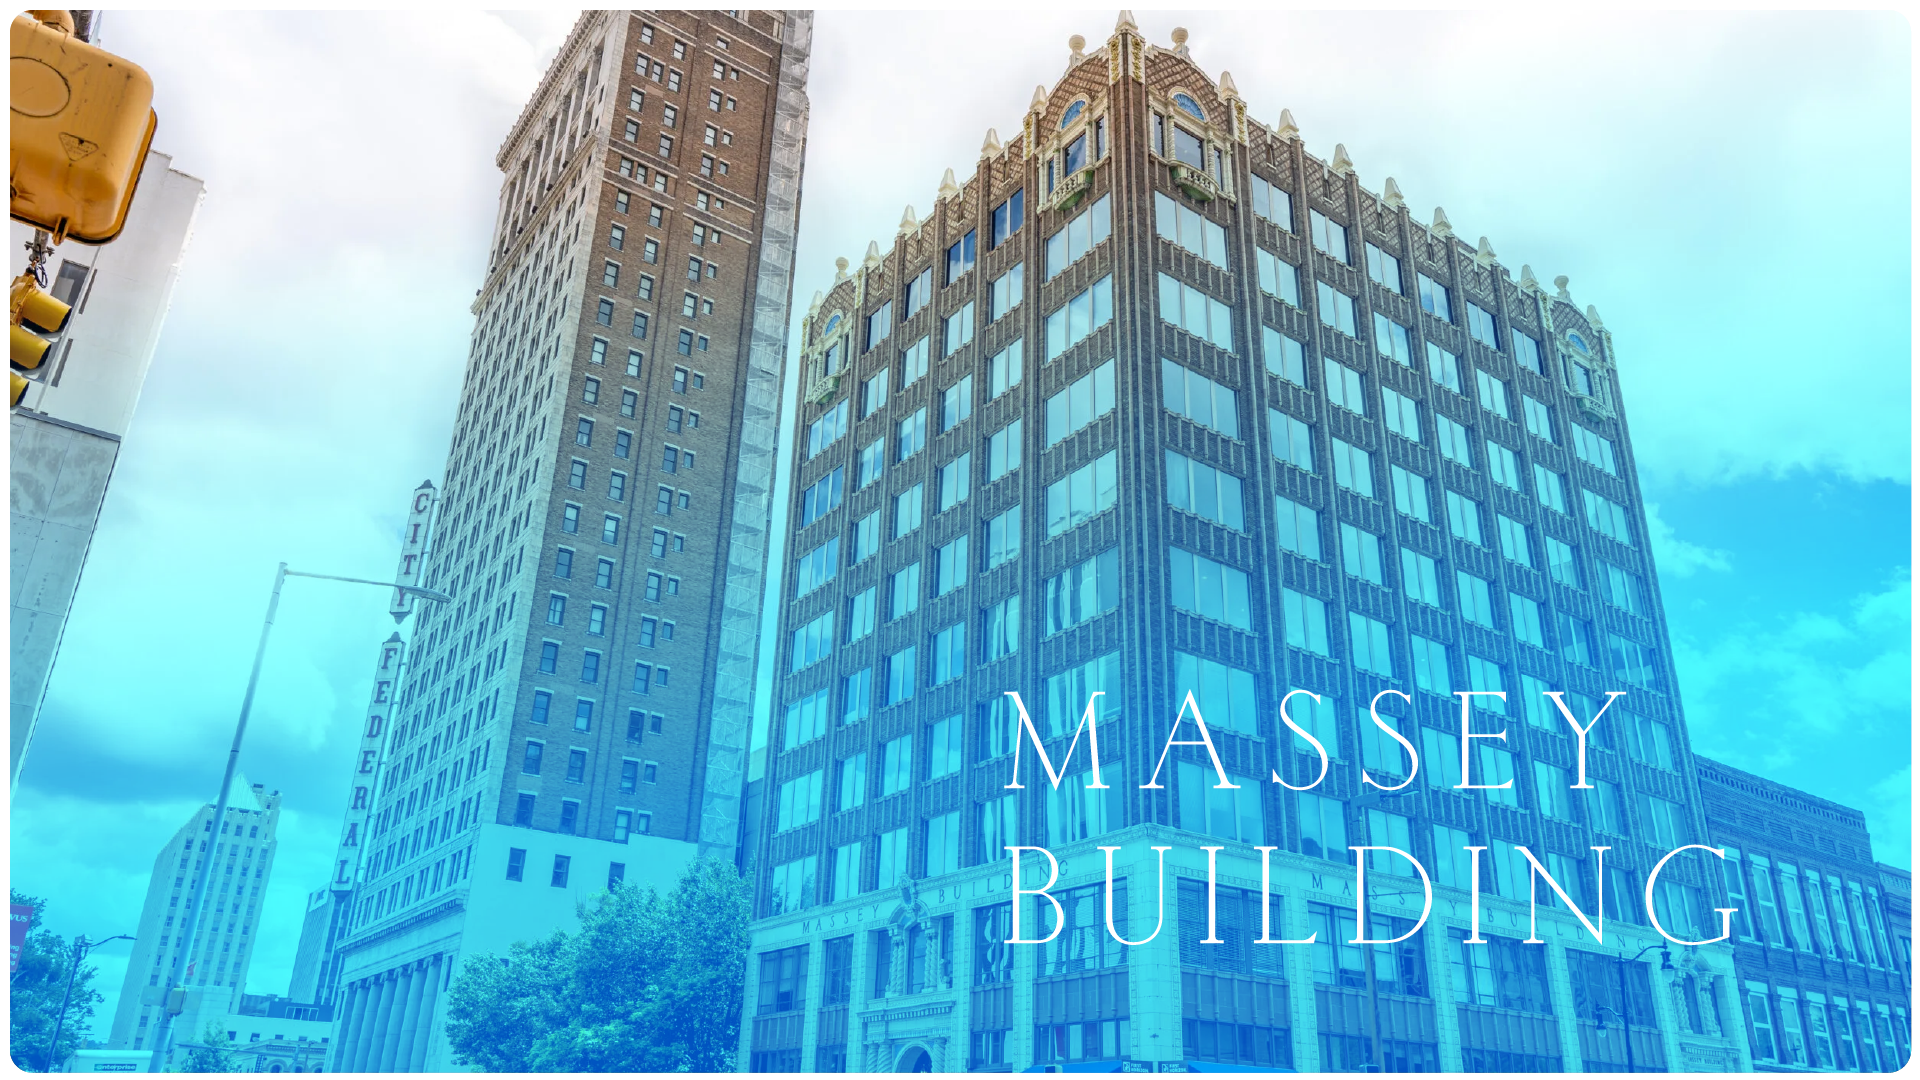 The Massey Building